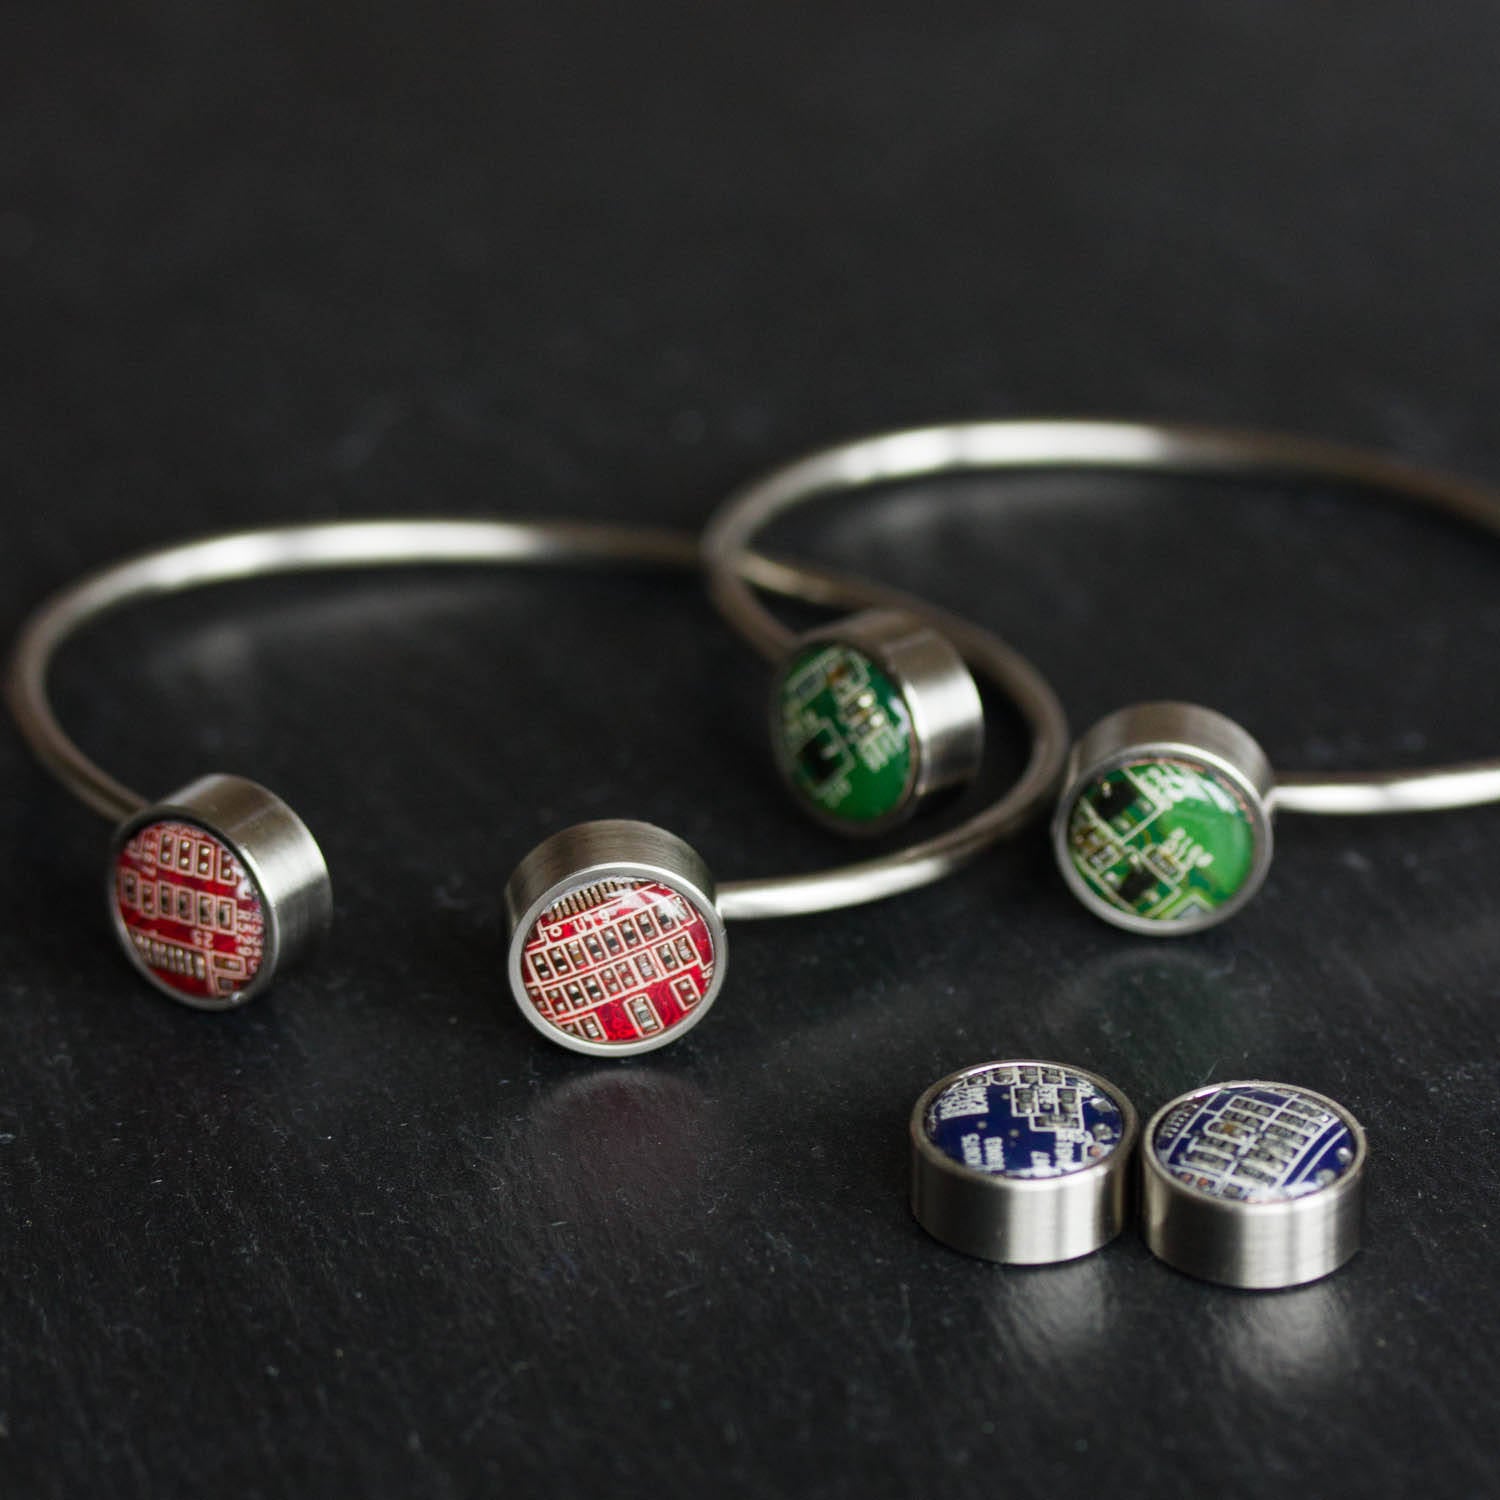 Bangle bracelet with interchangeable buttons